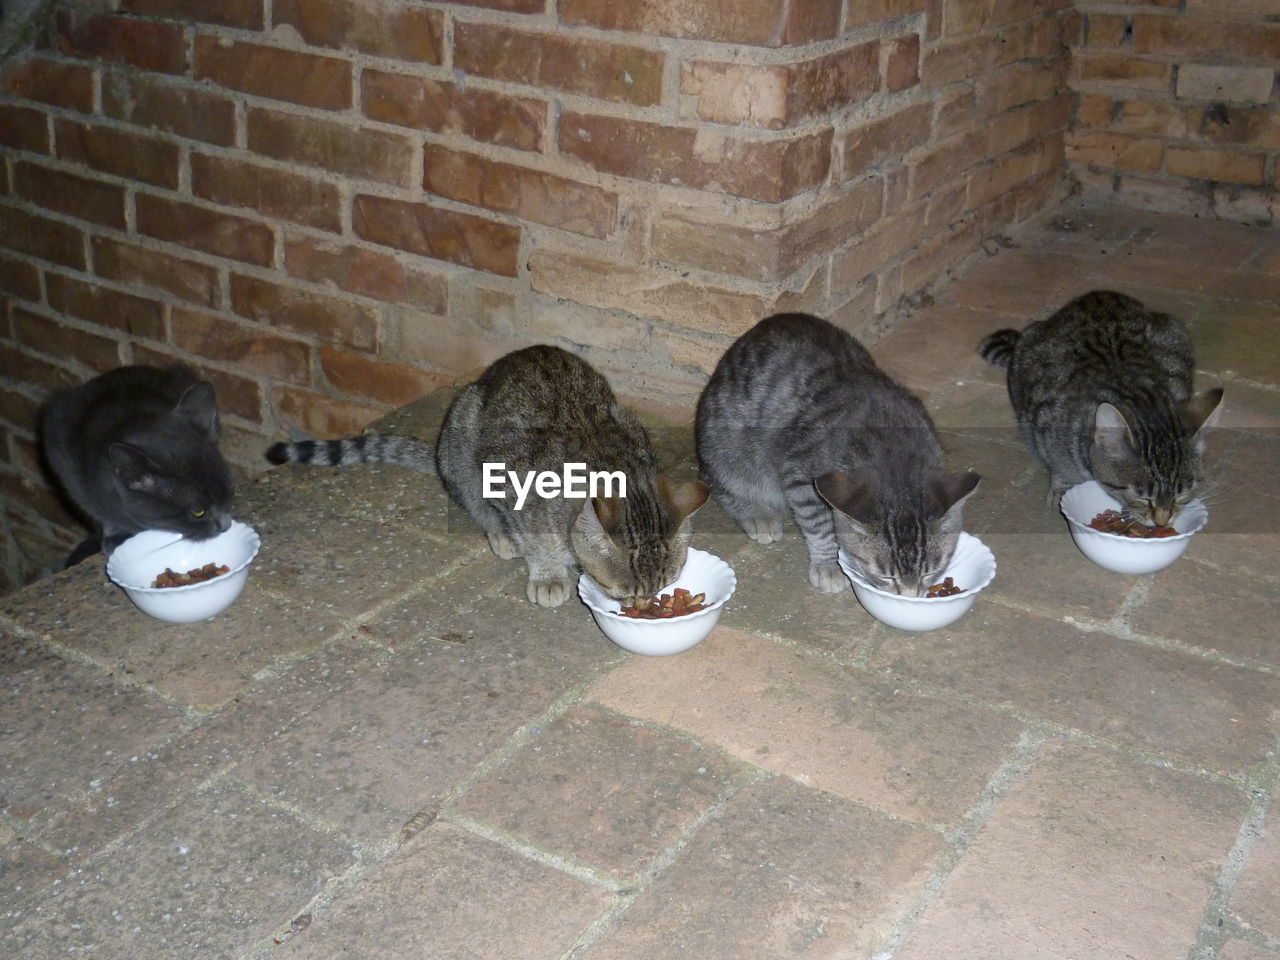 Cats eating from bowl